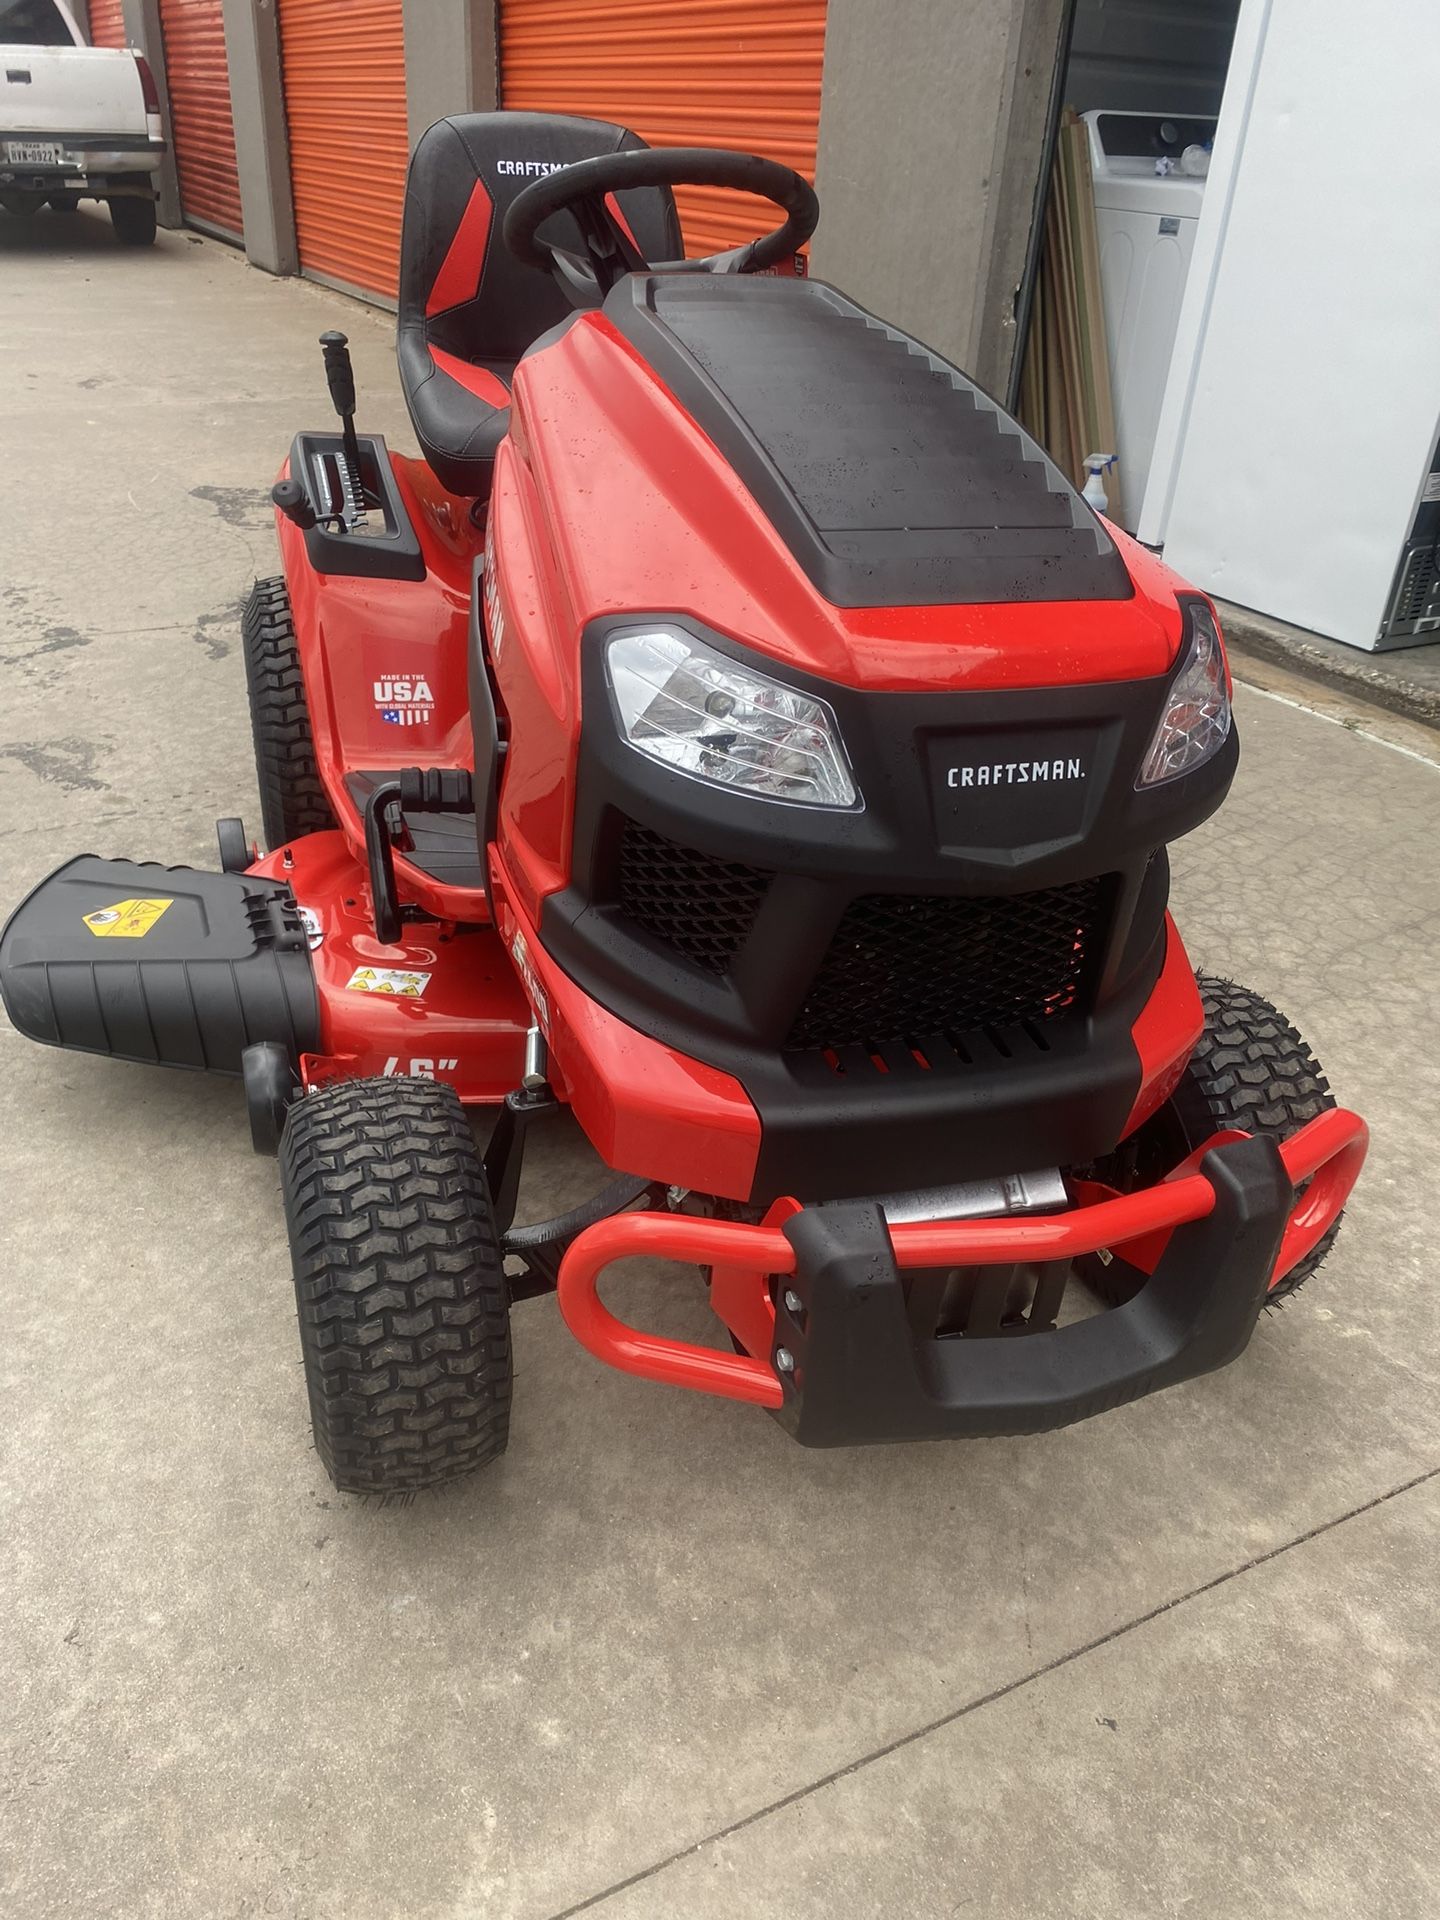 New, 0.00 Hours CRAFTSMAN T2400 Turn Tight 46-in 23-HP V-twin Gas Riding Lawn Mower $1850.00.!!!!!AFFIRMED !!!!!!